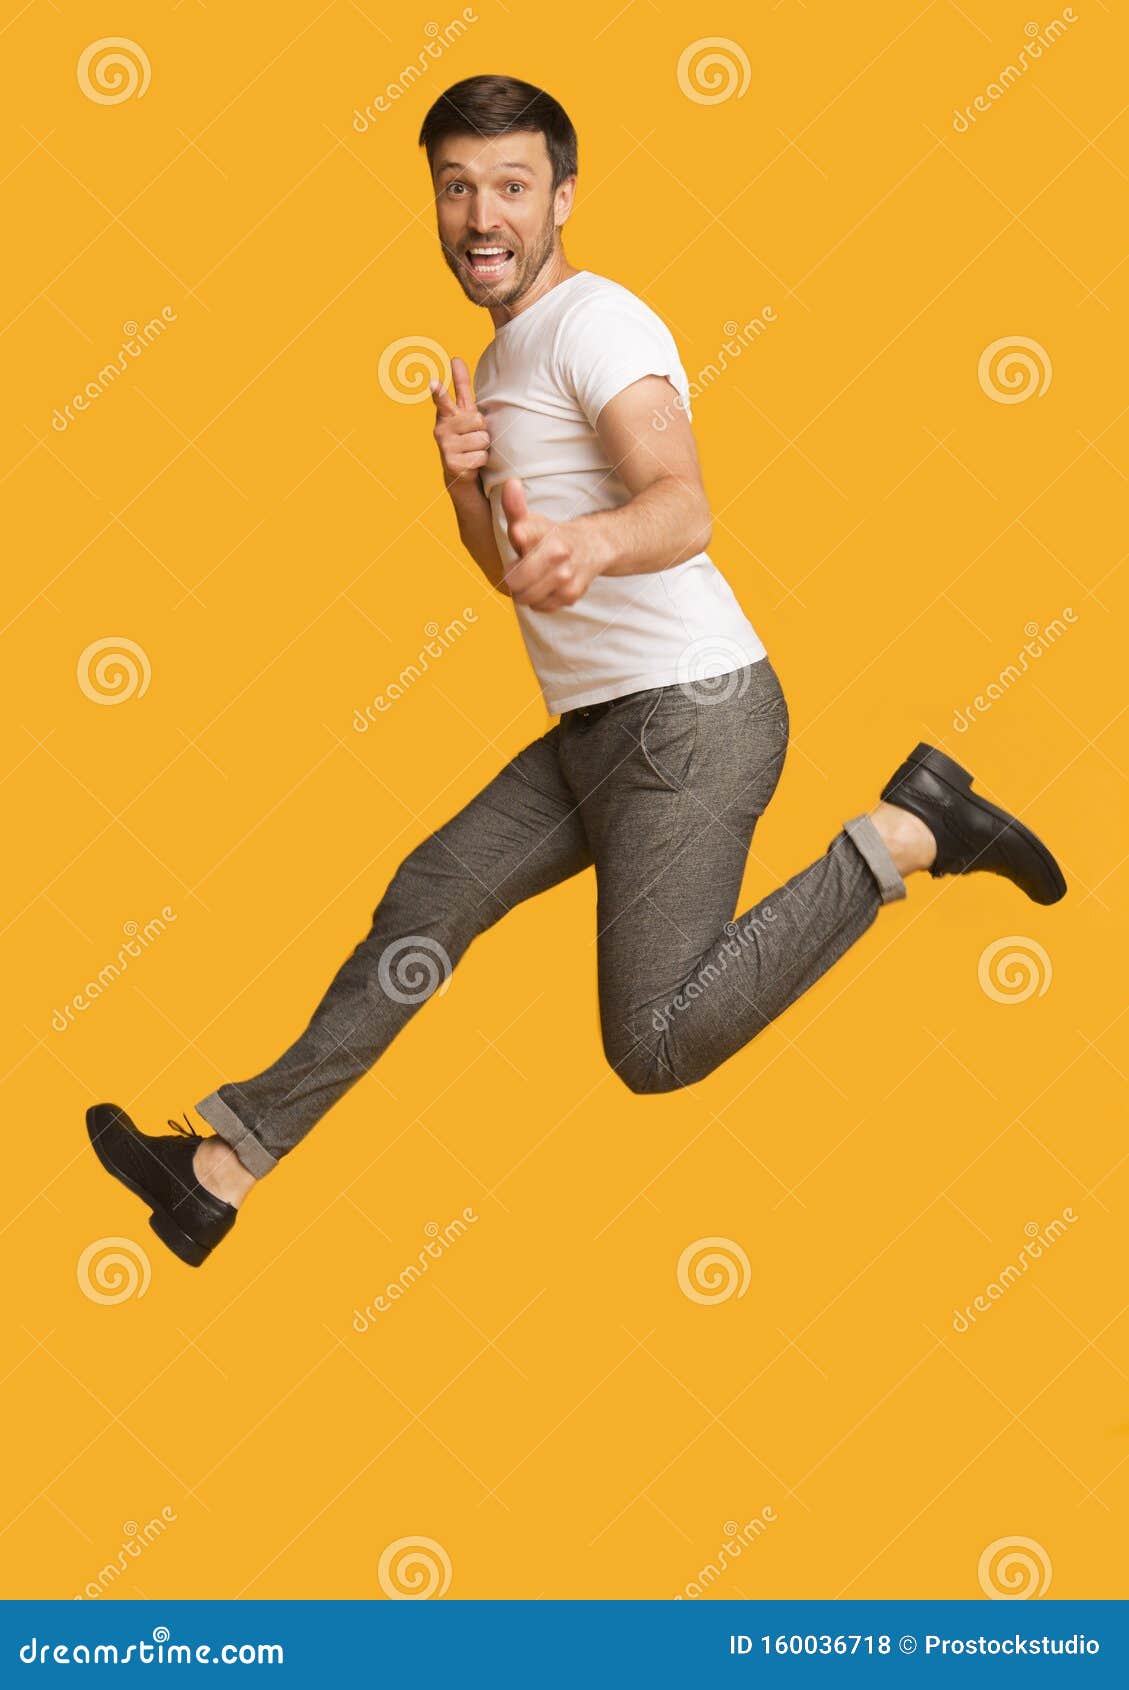 Man Jumping Pointing Fingers at Camera, Yellow Background Stock Photo -  Image of camera, male: 160036718